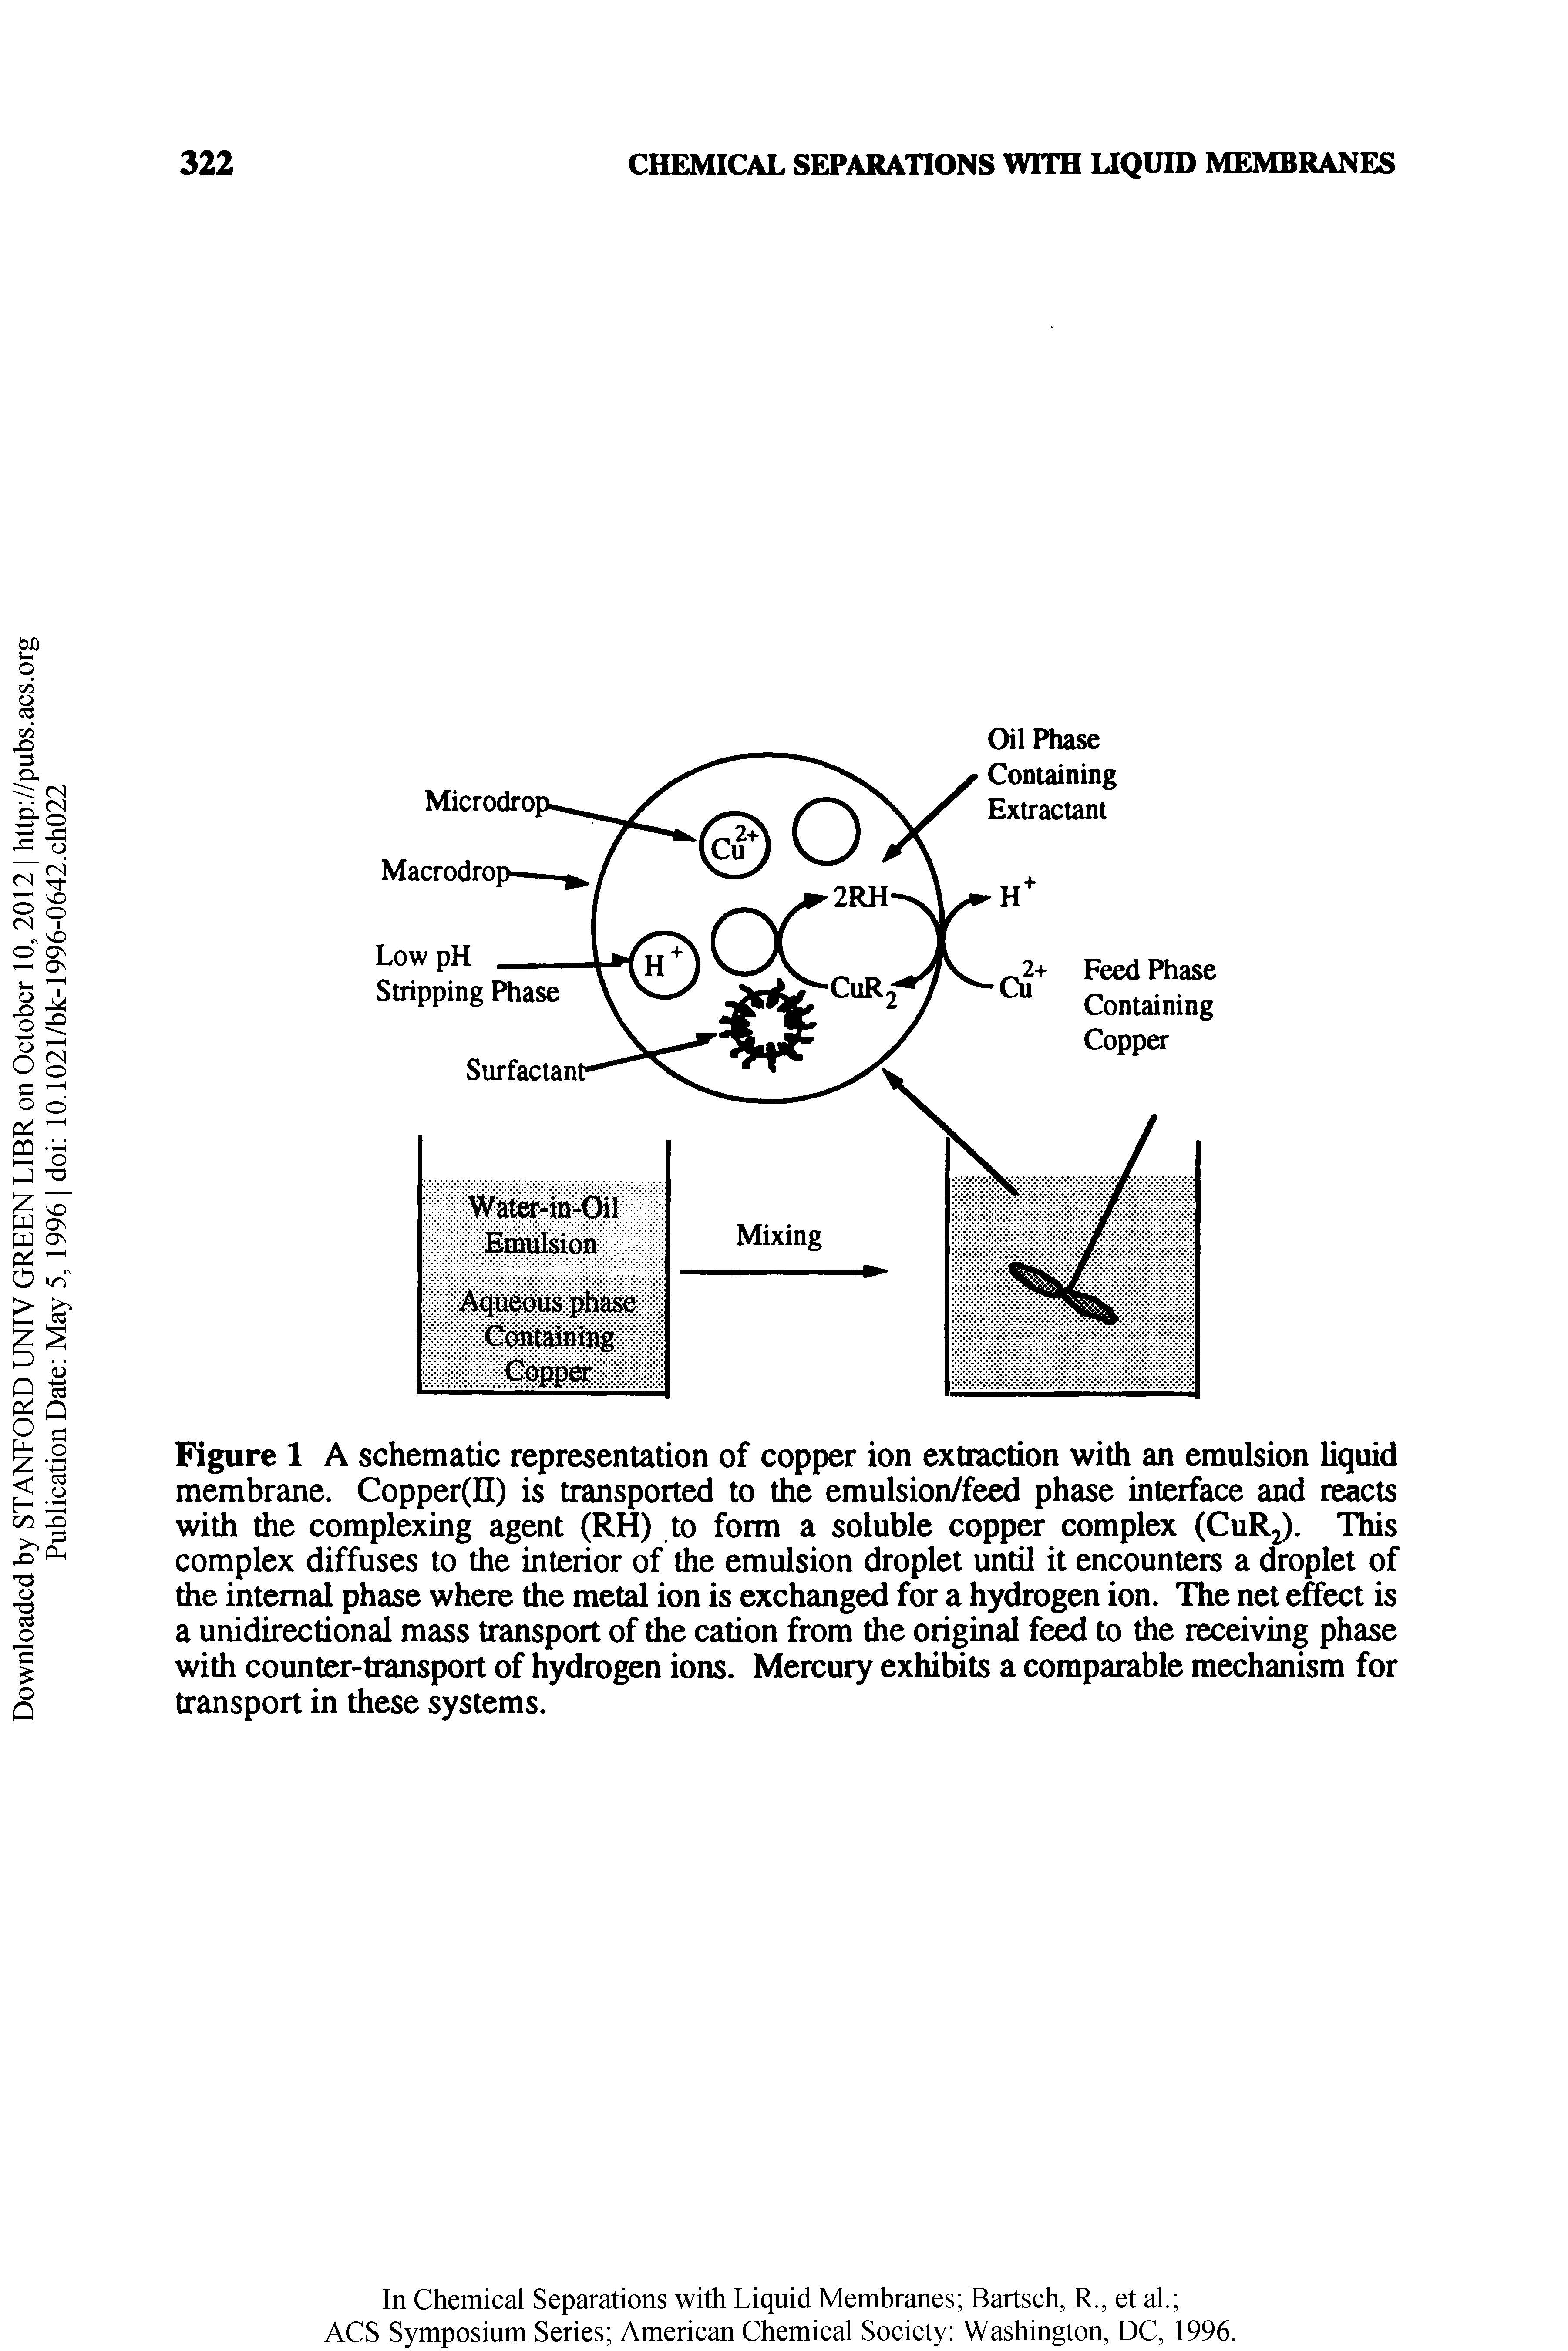 Figure 1 A schematic representation of copper ion extraction with an emulsion liquid membrane. Copper(II) is transported to the emulsion/feed phase interface and reacts with the complexing agent (RH) to form a soluble copper complex (CuRj). This complex diffuses to the interior of the emulsion droplet until it encounters a droplet of the internal phase where the metal ion is exchanged for a hydrogen ion. The net effect is a unidirectional mass transport of the cation from the original fe to the receiving phase with counter-transport of hydrogen ions. Mercury exhibits a comparable mechanism for transport in these systems.